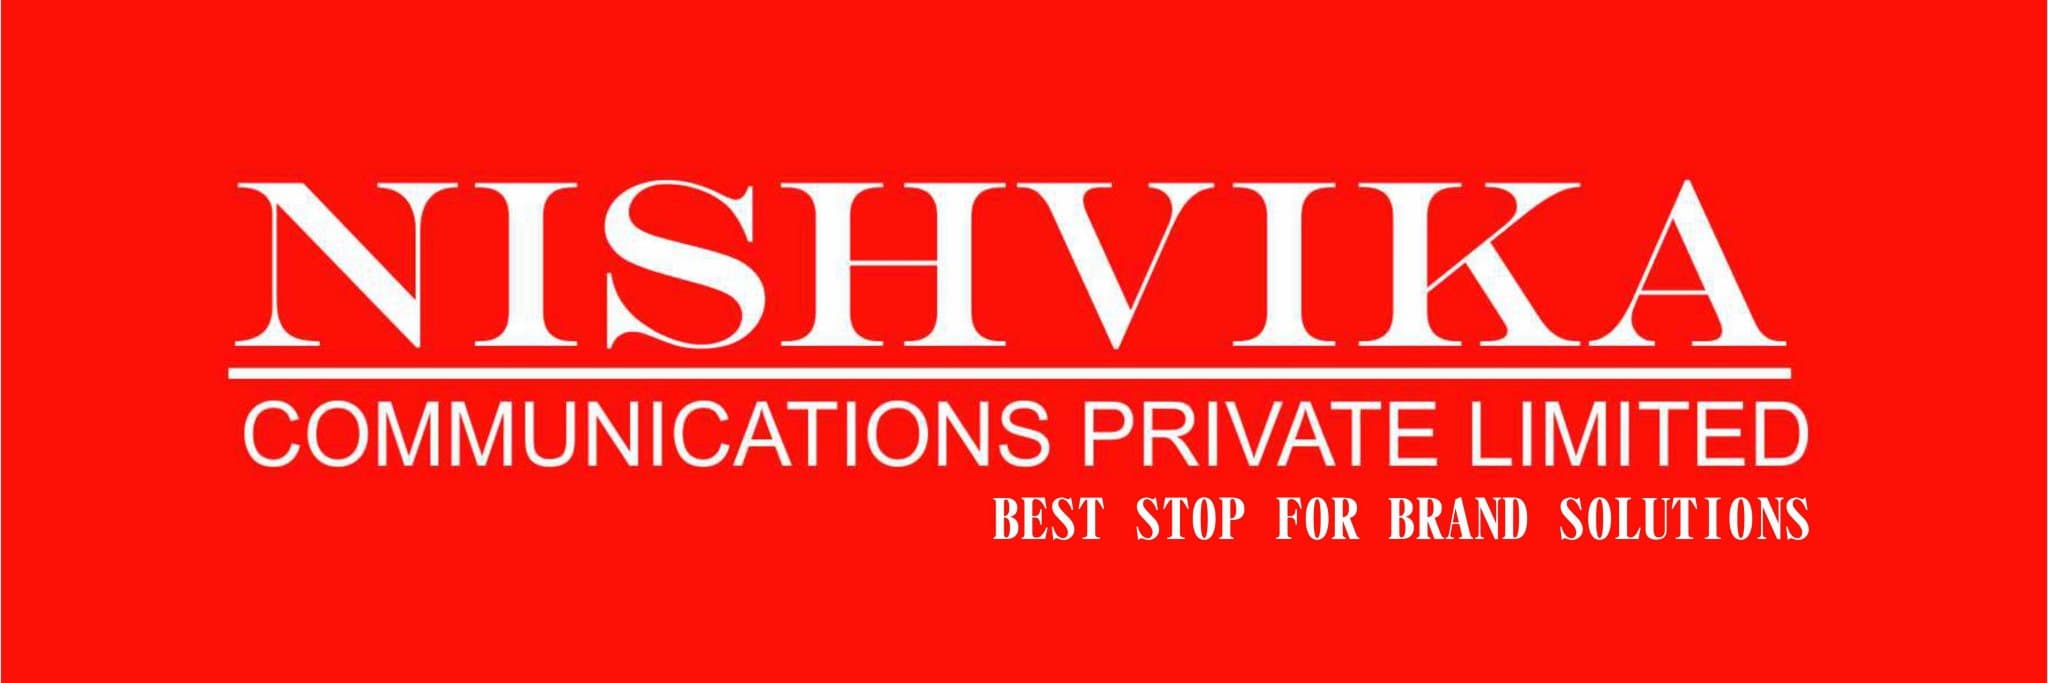 nishvika communications private limited cover picture